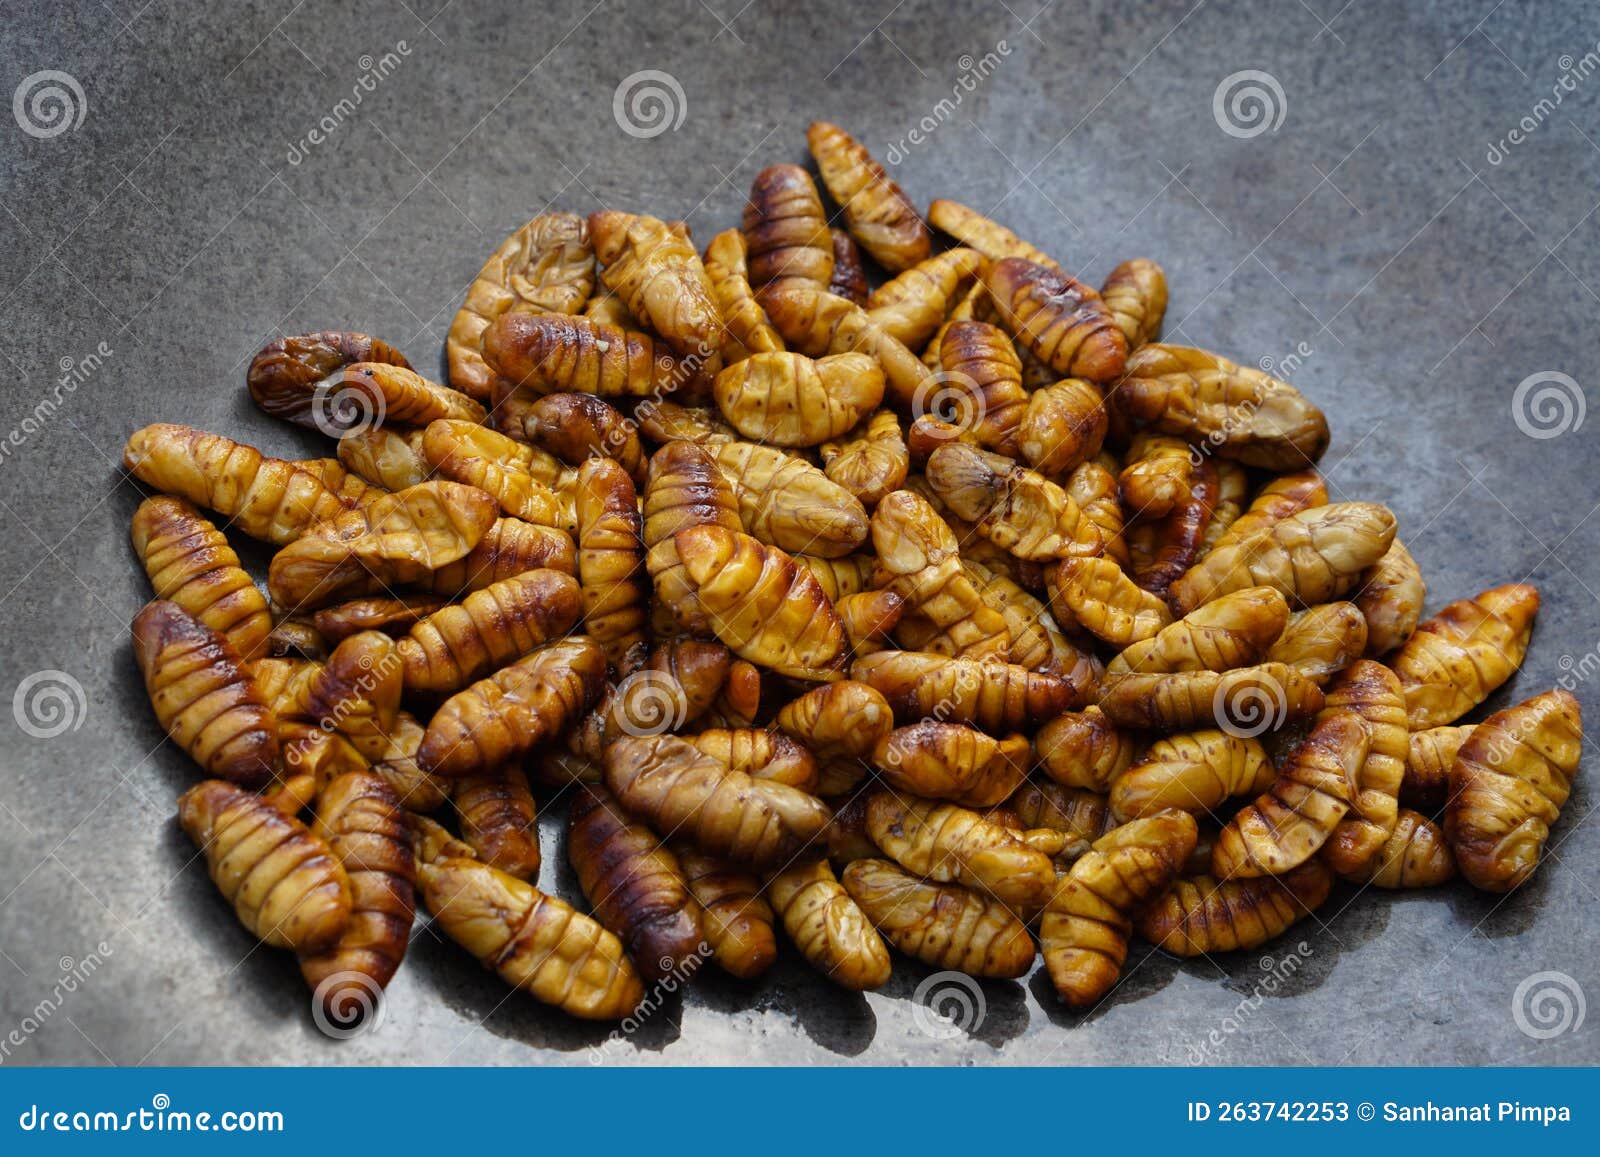 Fried Silk Worms, Weird Food. Insects Eating. Stock Image - Image of  agriculture, health: 263742253